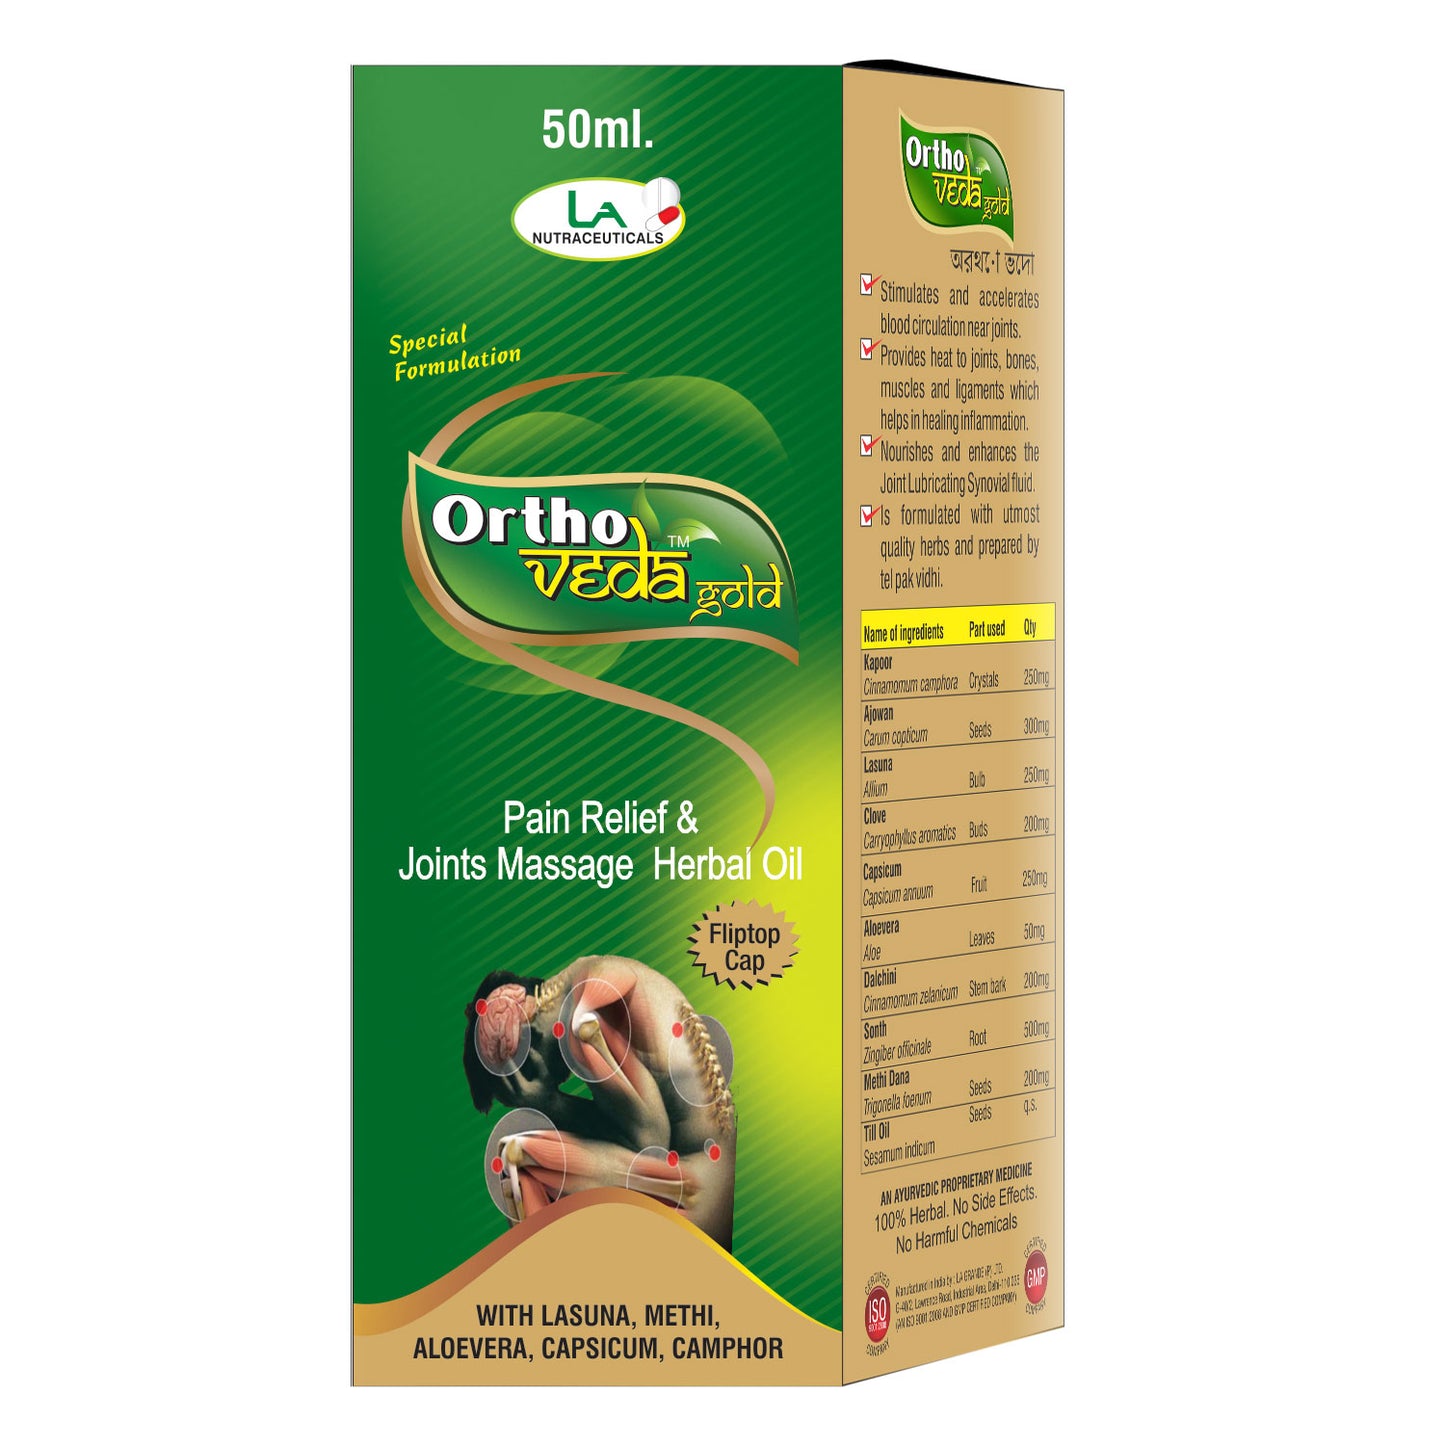 Ortho Veda Joint Pain Relief Oil| Use in Joint Pain, Muscle Pain and Body Pain- 50ml